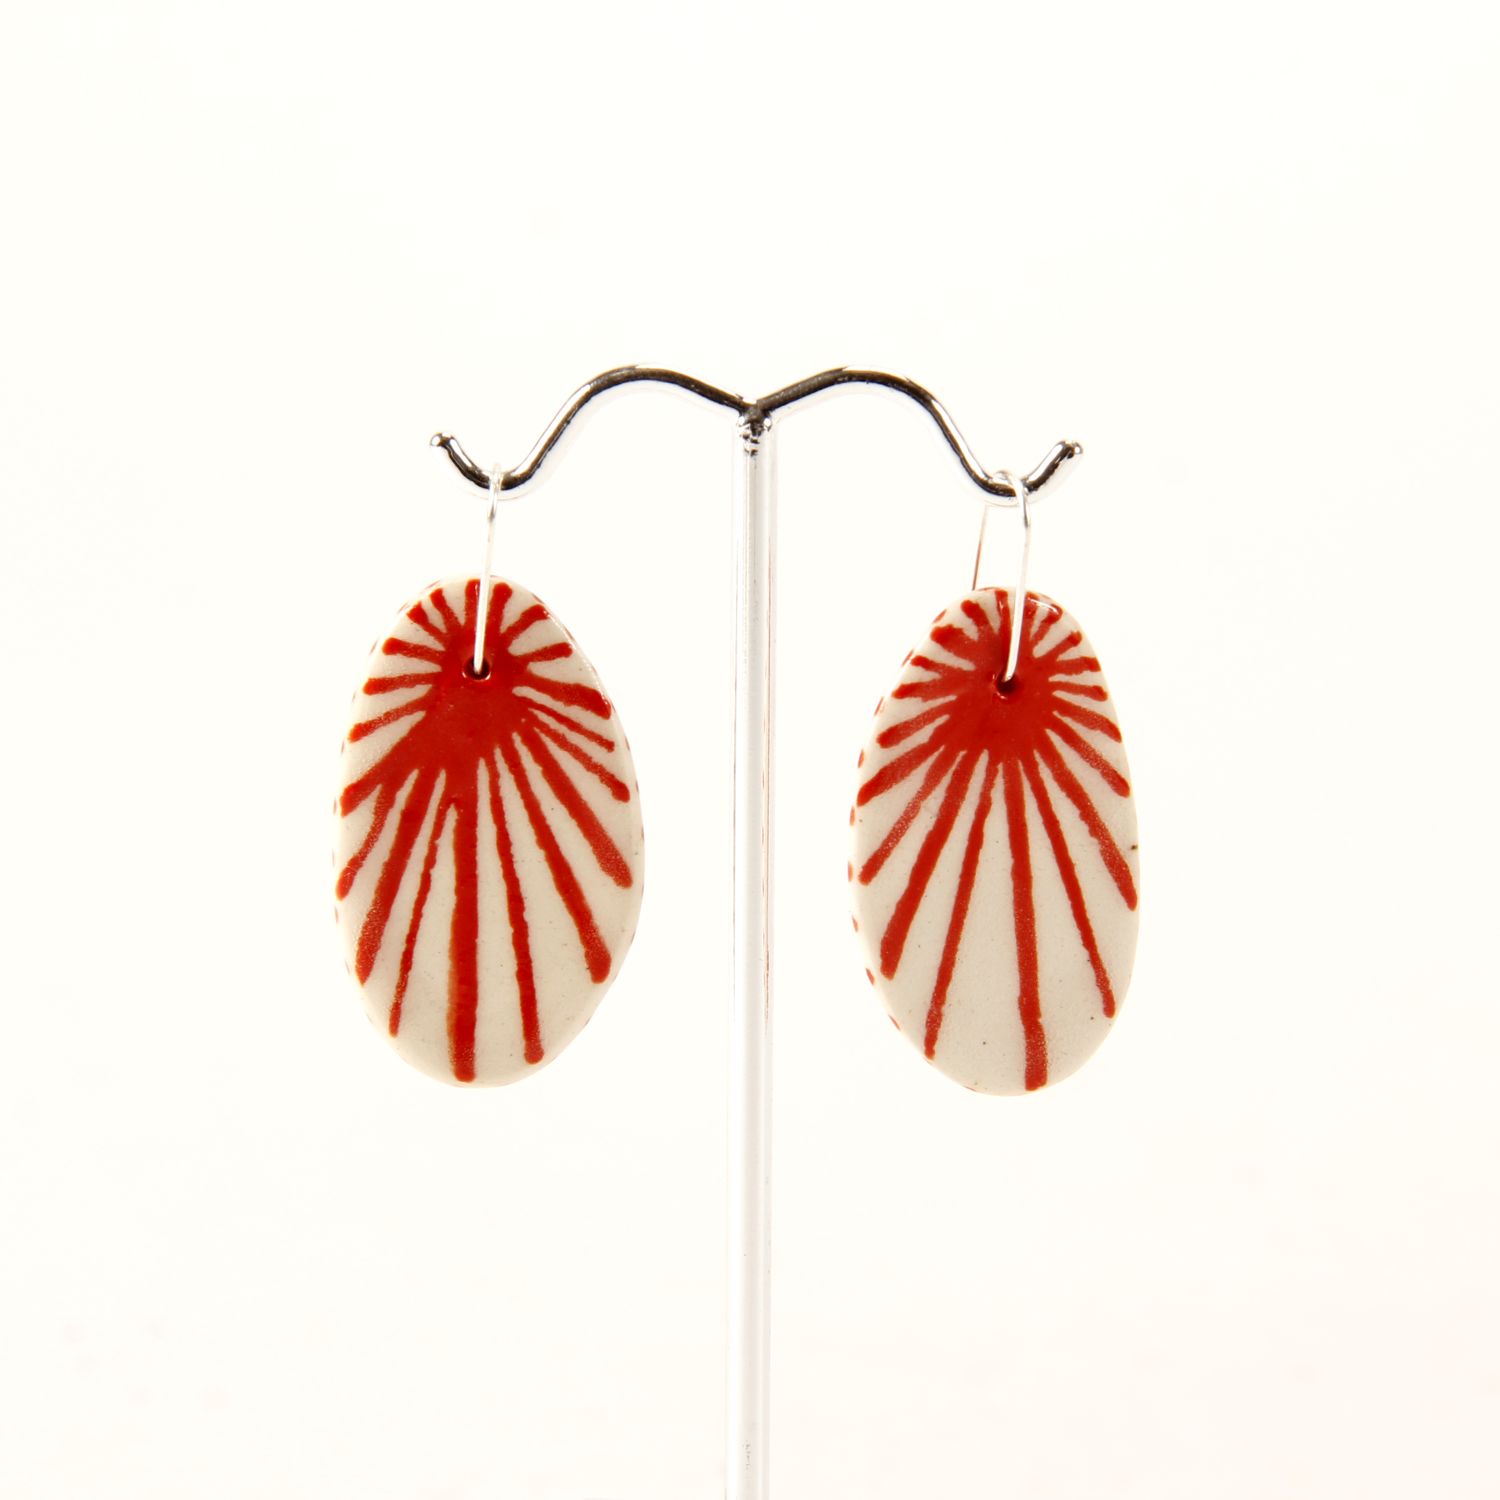 Here and Here: Medium Disc Earrings with Radiating Lines Product Image 1 of 2